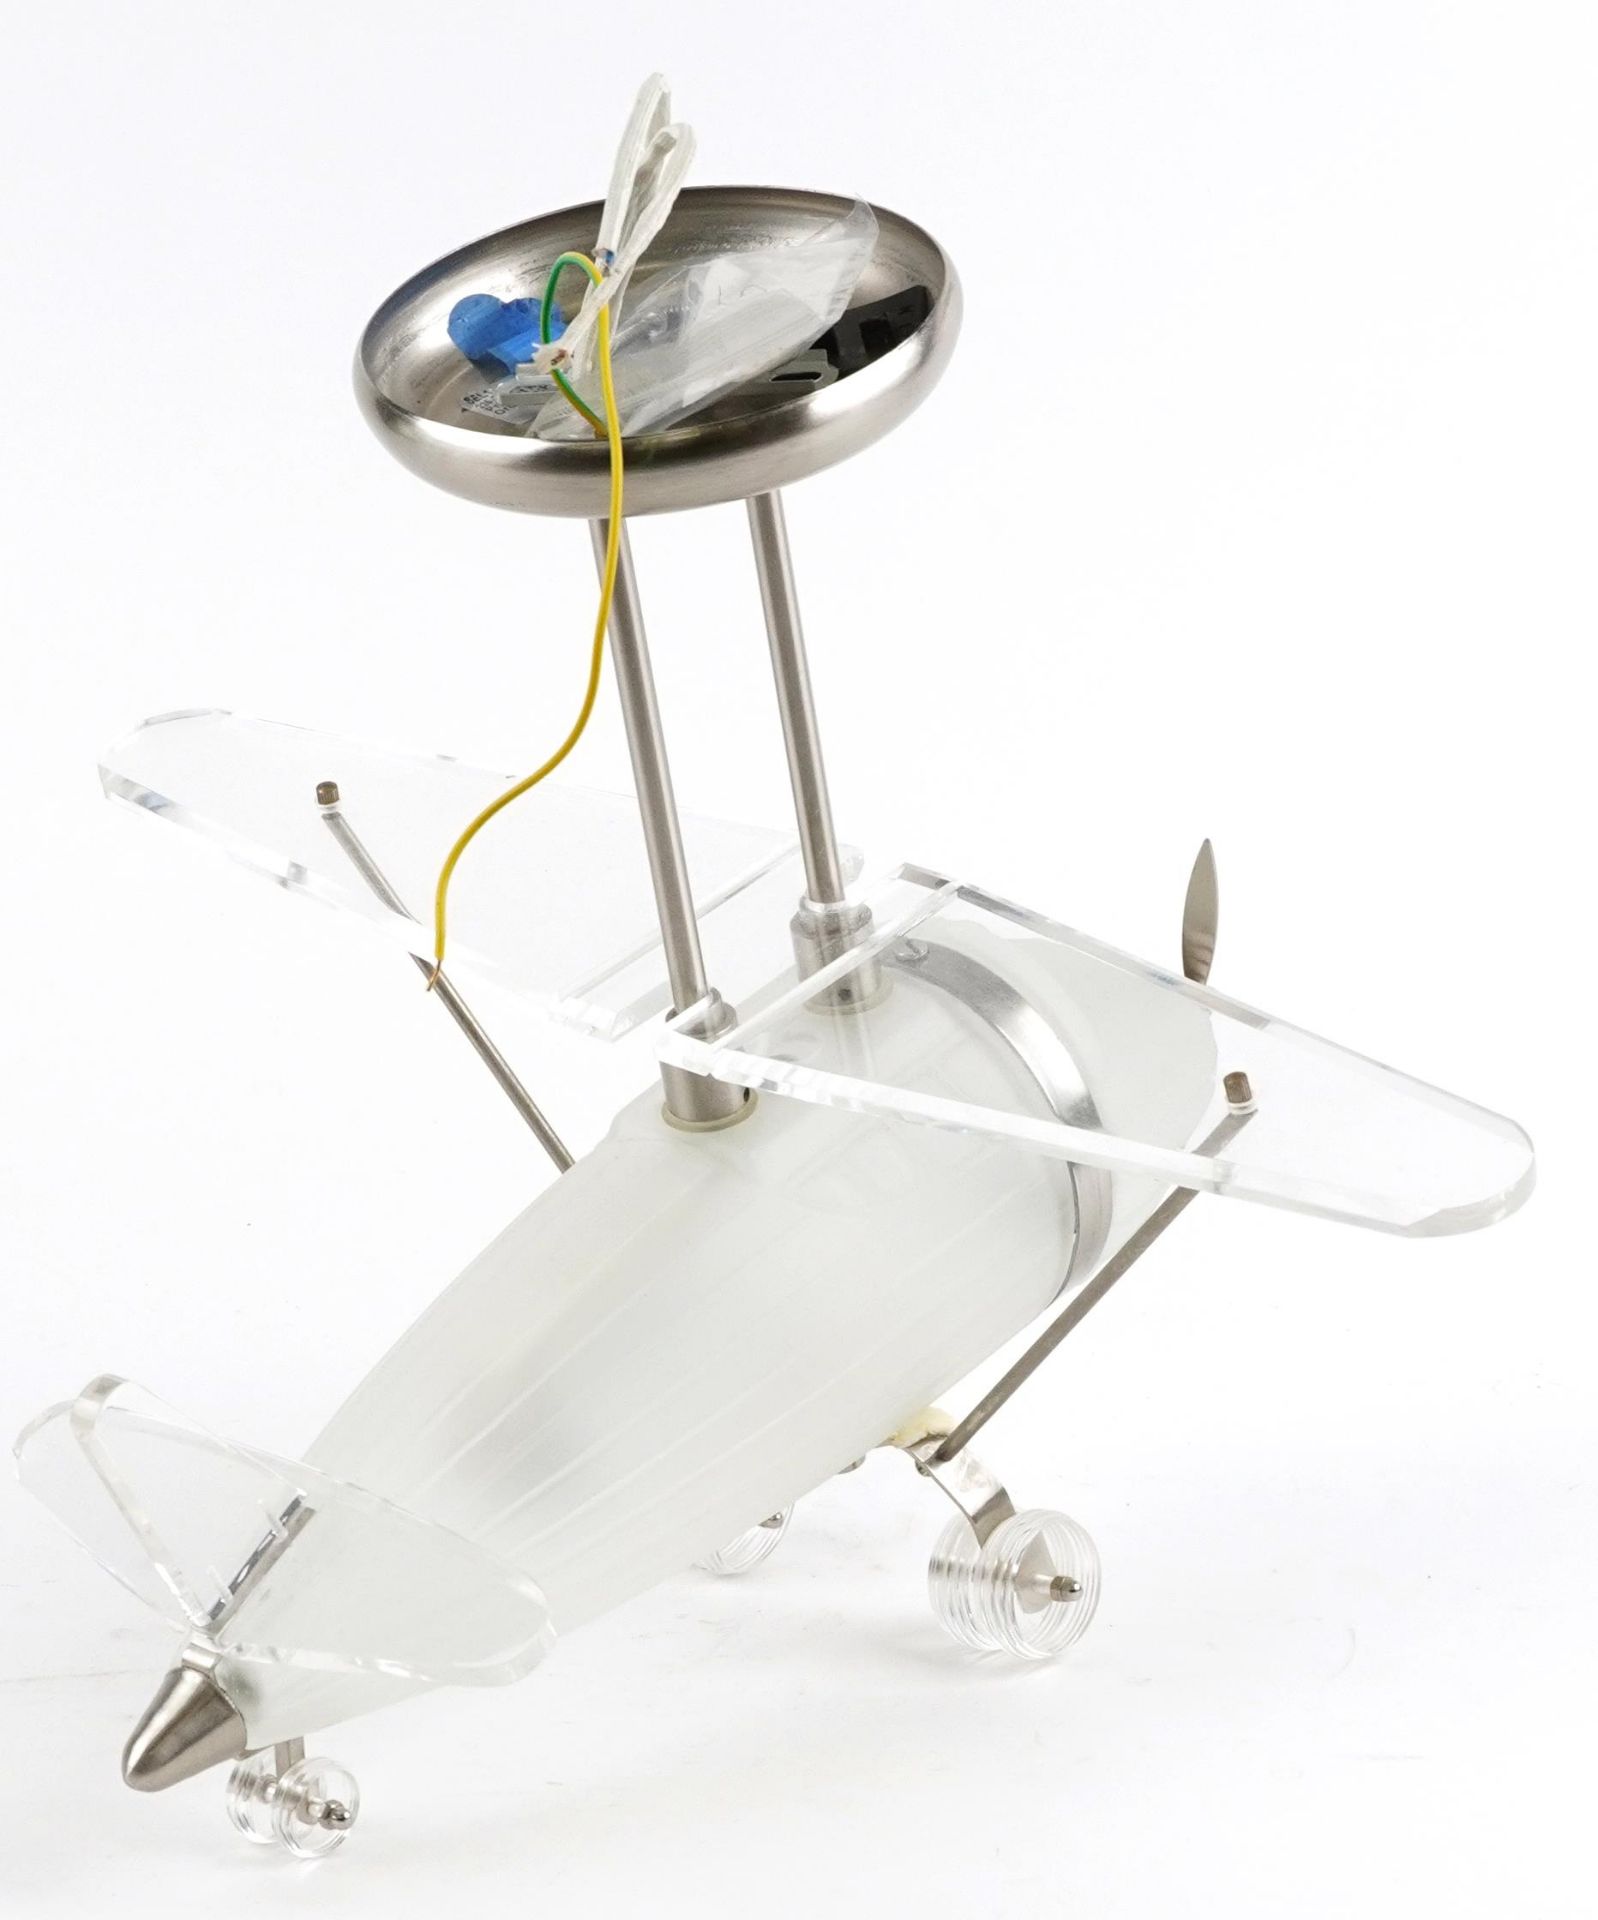 1970s style Perspex and frosted glass light fitting with chromed mounts in the form of an aeroplane, - Image 2 of 3